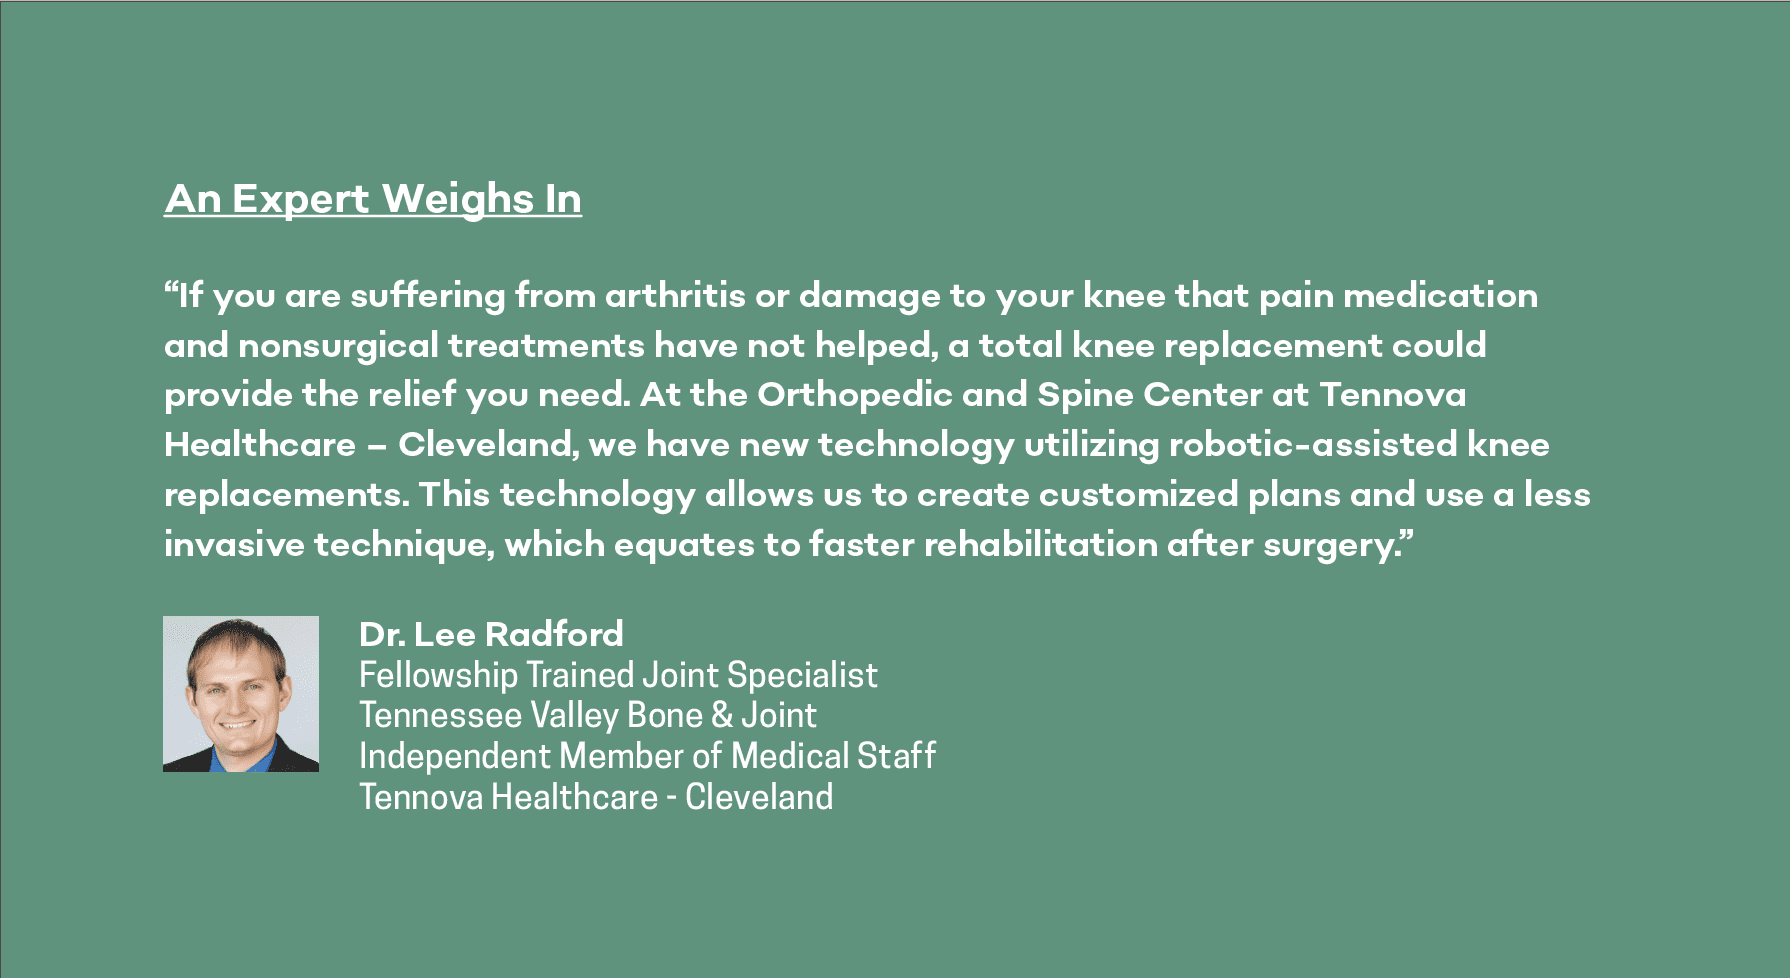 Doctor Lee Radford Fellowship trained joint specialist tennessee valley bone and joint independent member of medical staff tennova healthcare cleveland chattanooga